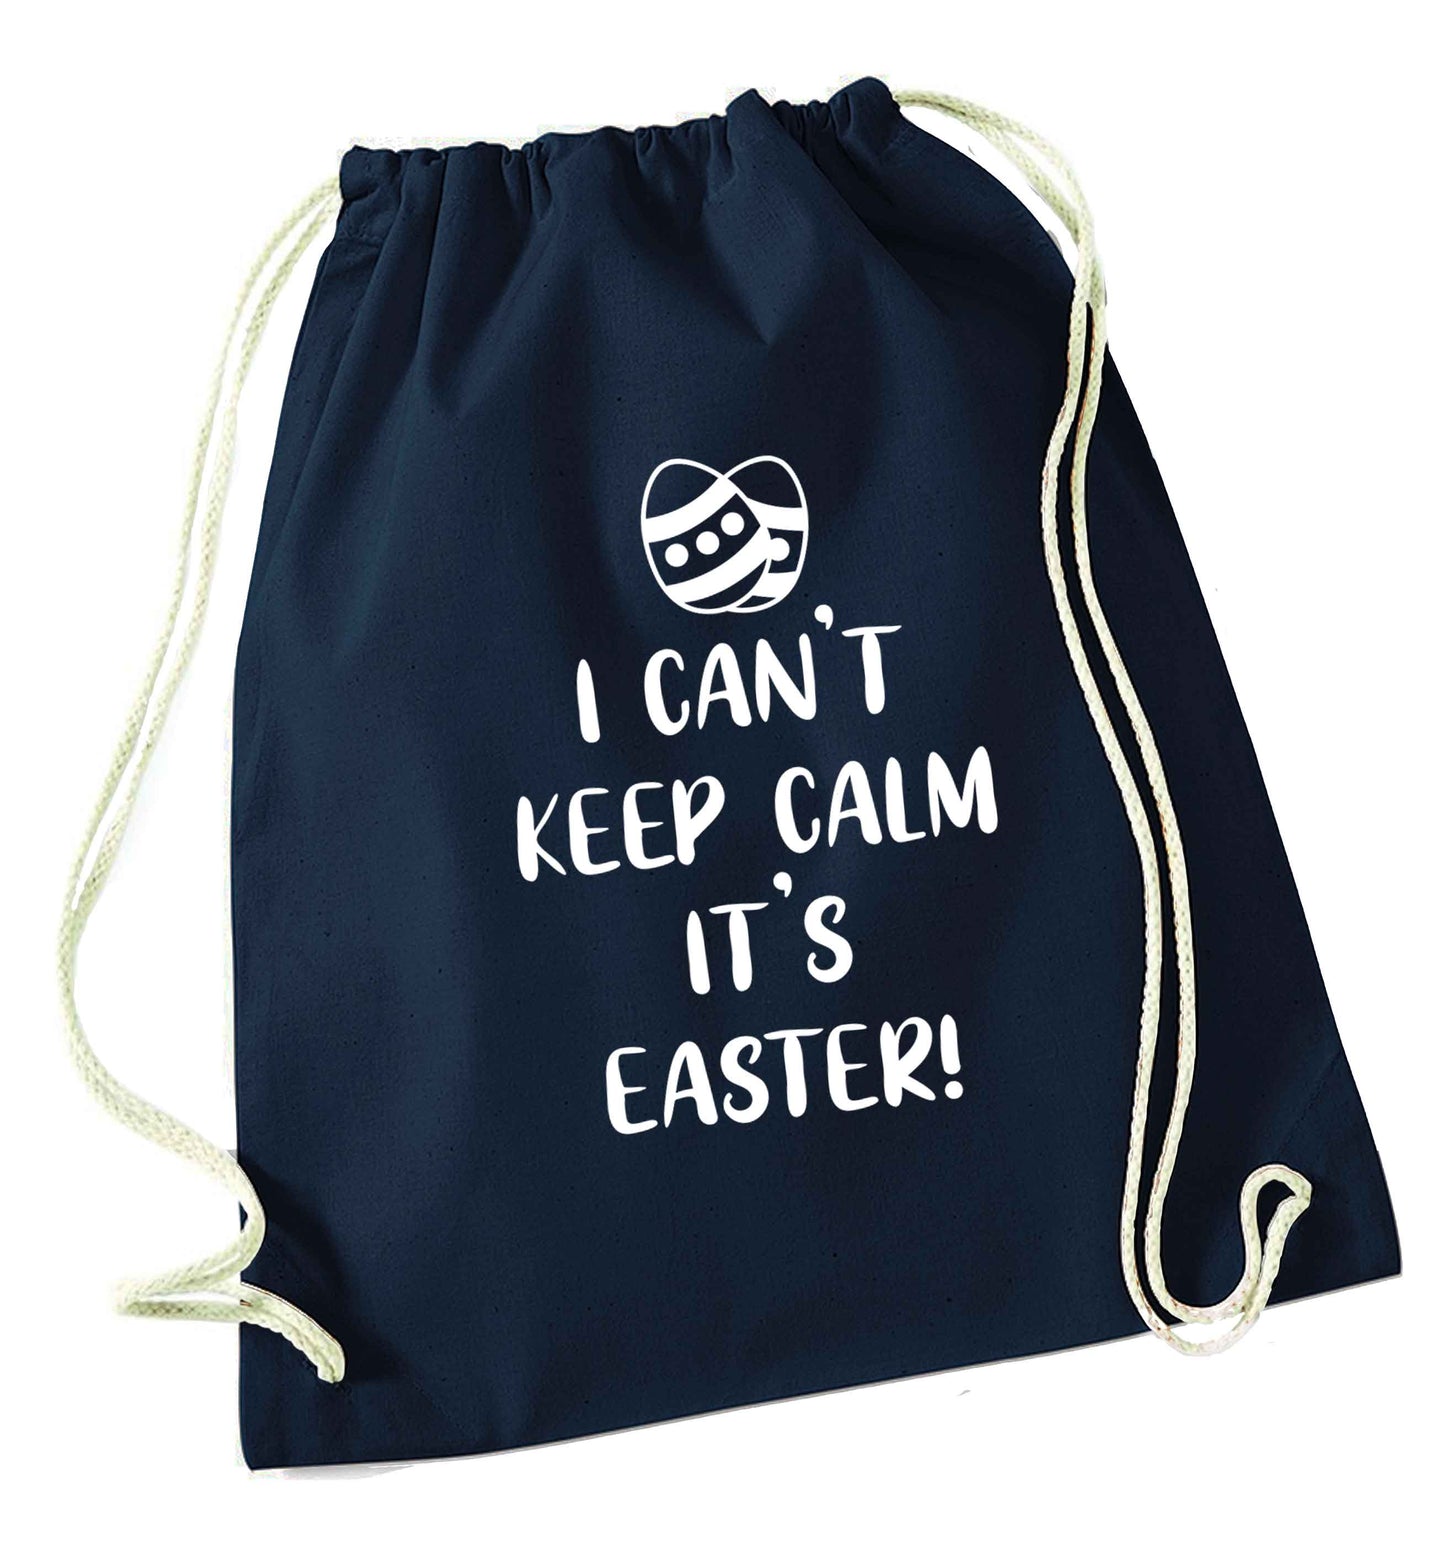 I can't keep calm it's Easter navy drawstring bag